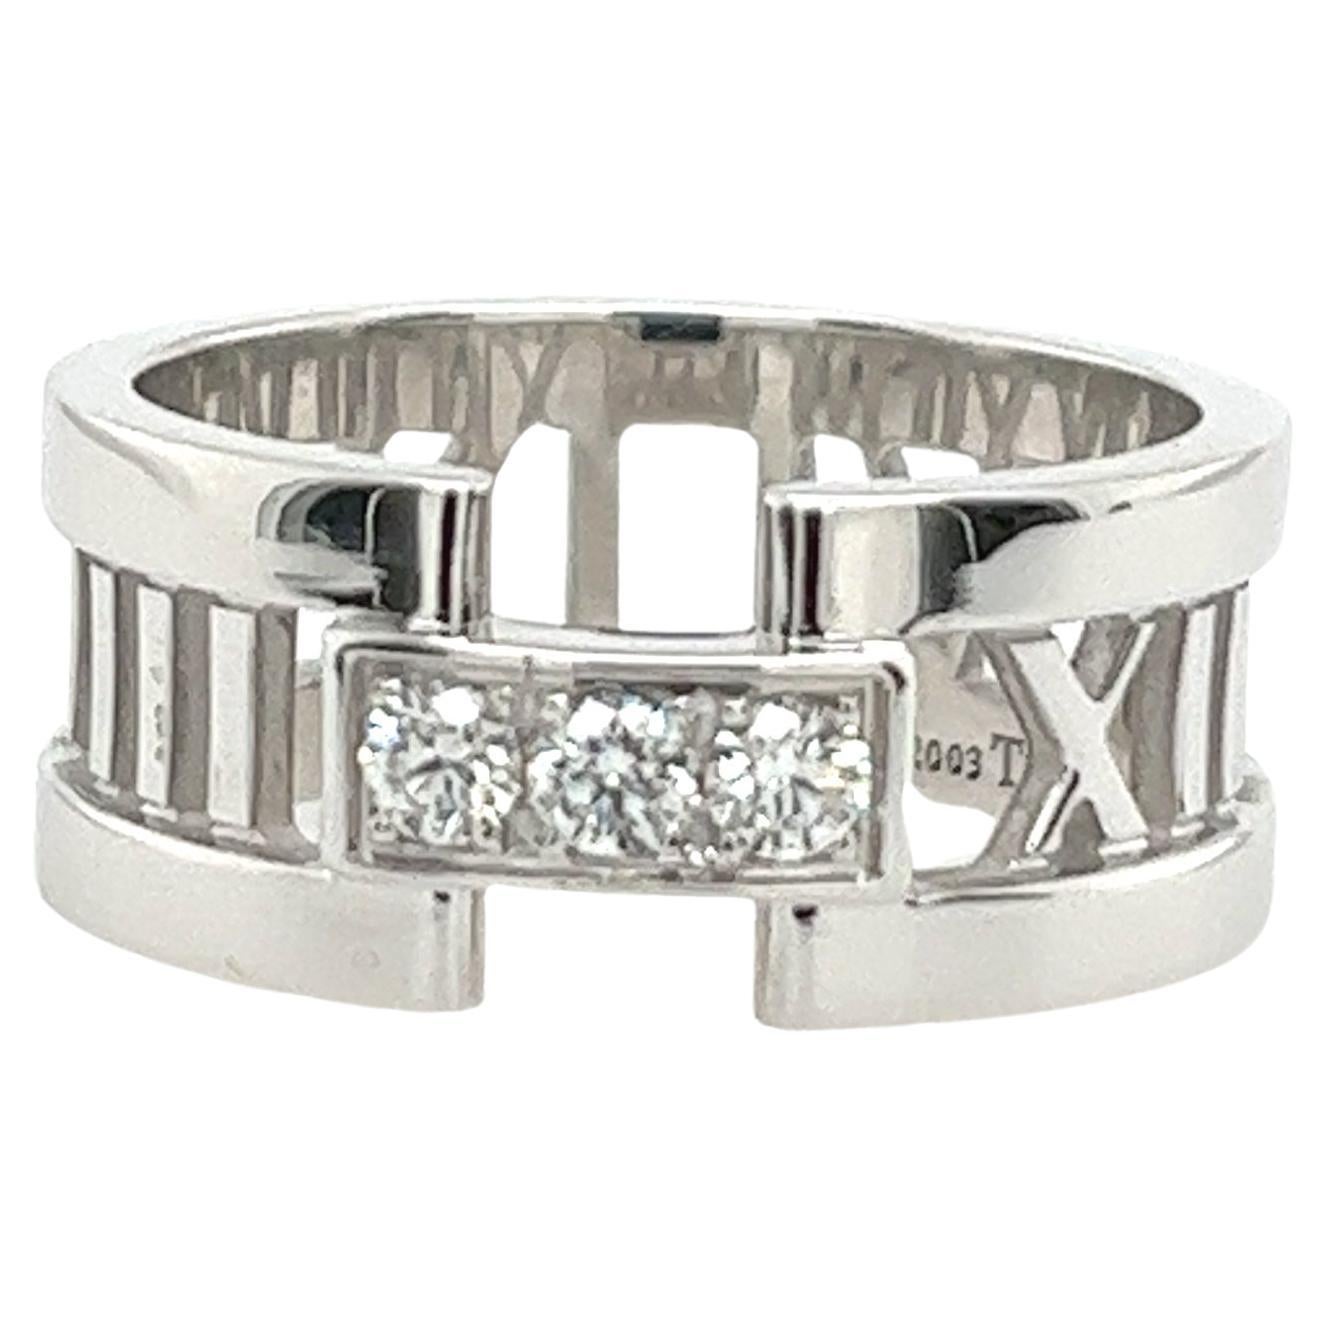 Tiffany & Co Atlas Ring in 18ct White Gold With Roman Numbers 